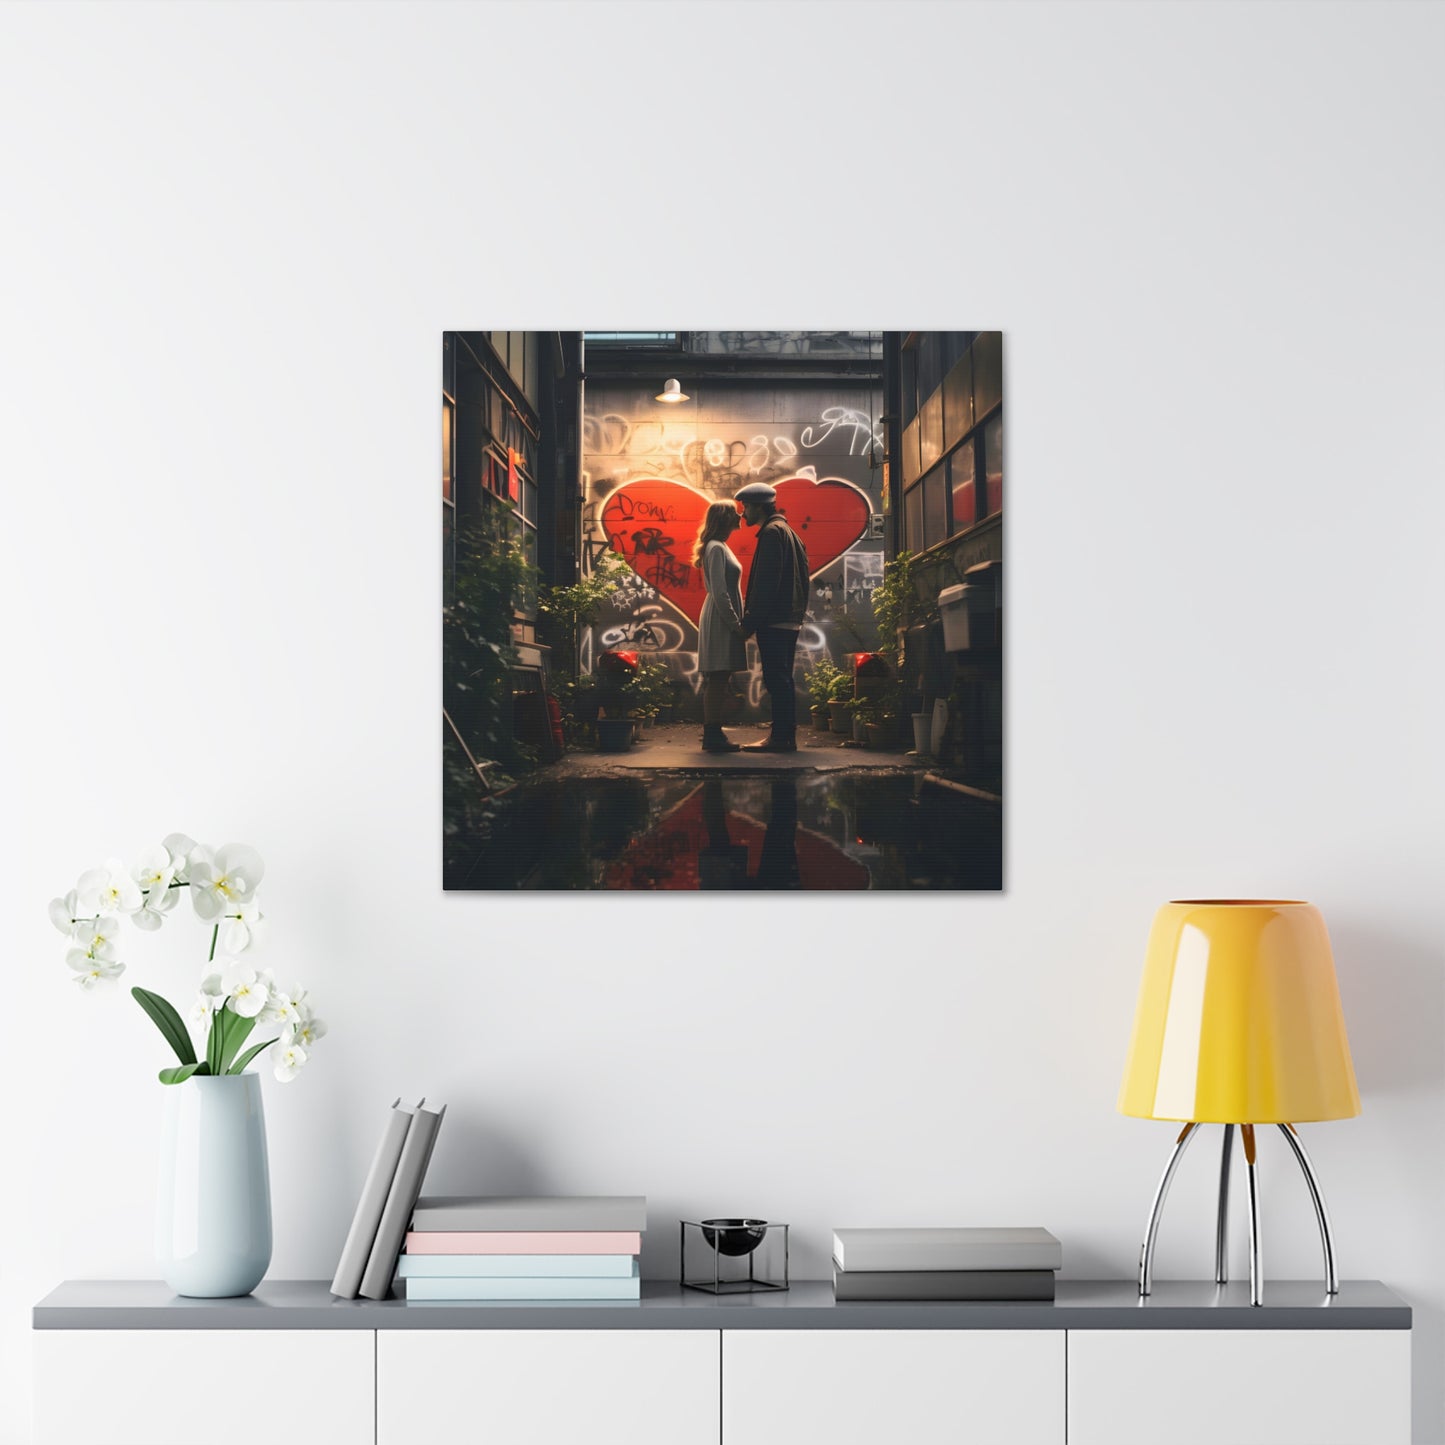 Jennifer Forest. Urban Love Story. Exclusive Canvas Print